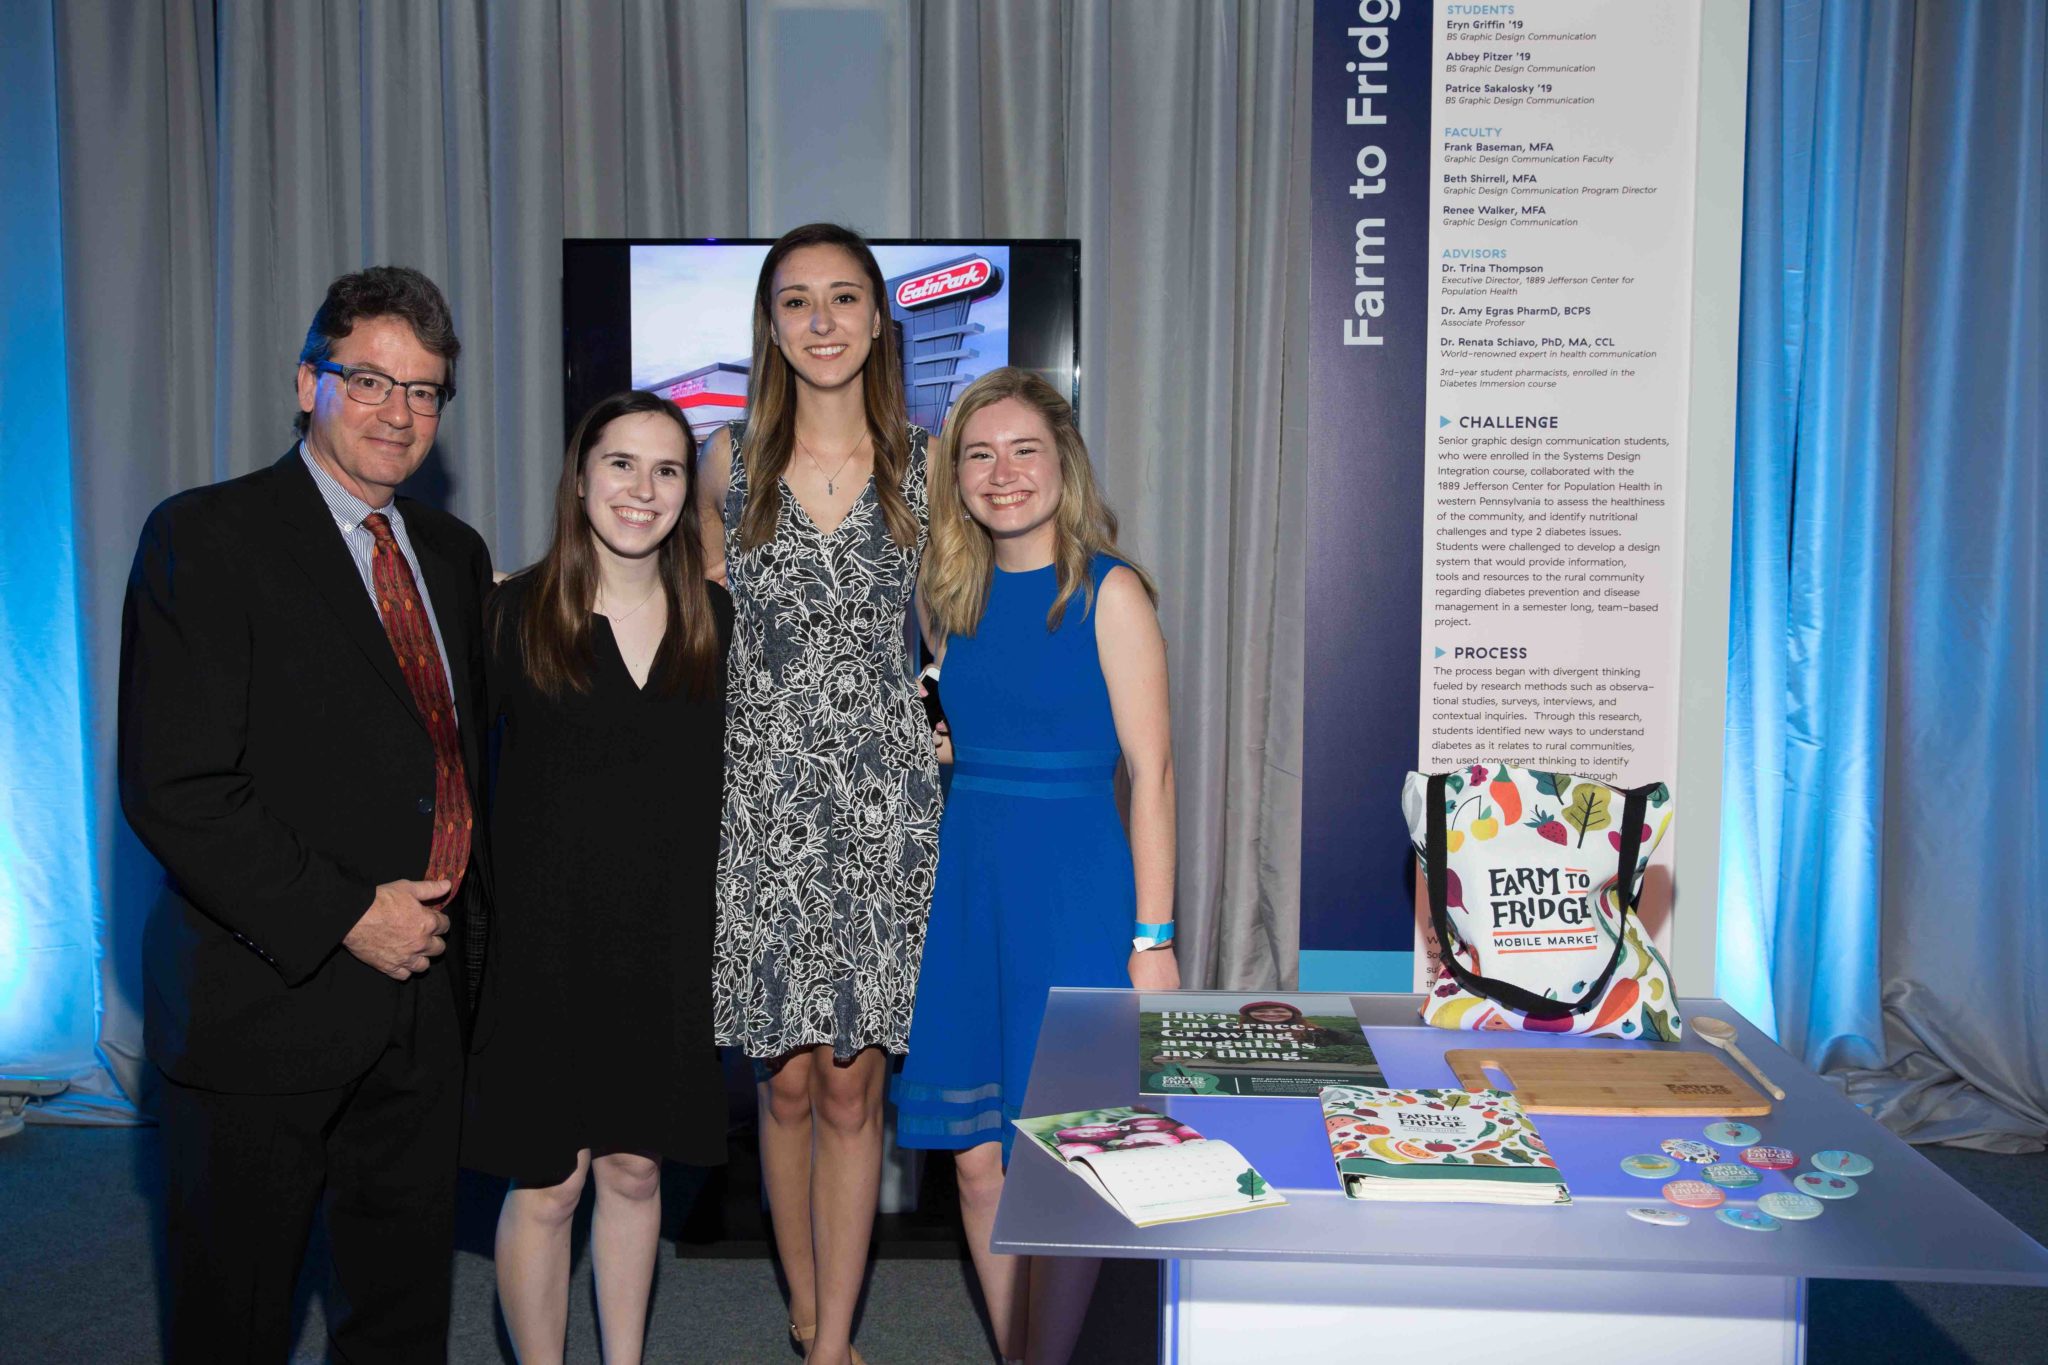 Abbey with fellow students and faculty at the Celebration of Innovation